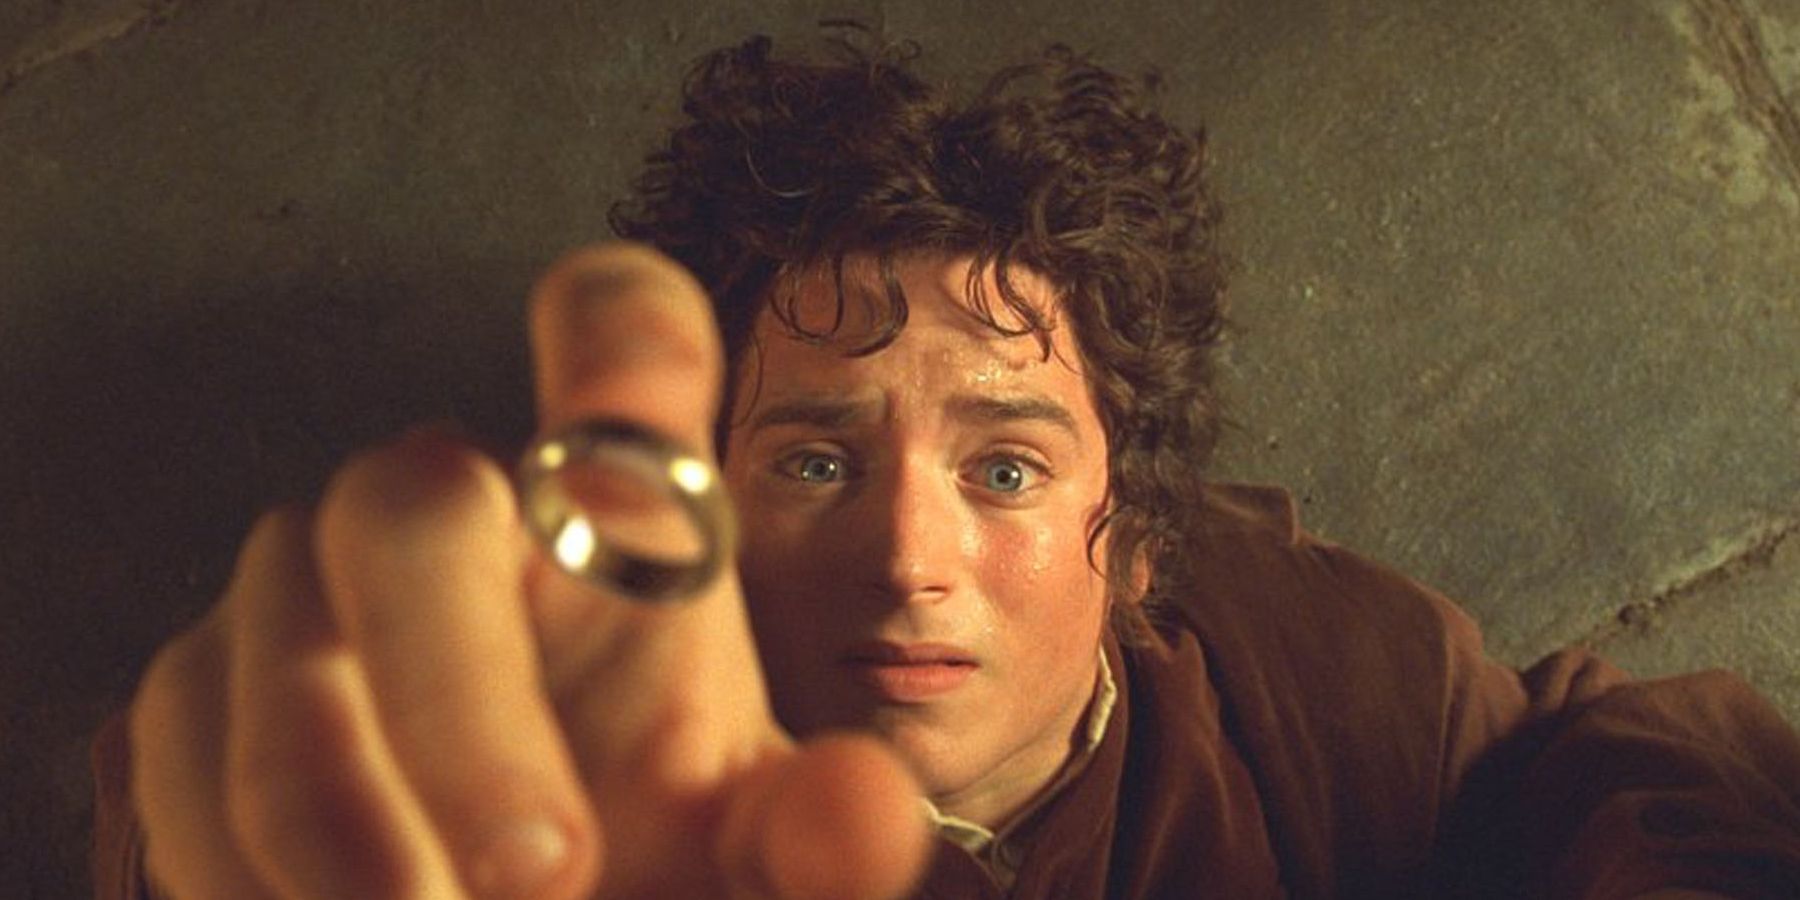 Harry Potter Vs Lord Of The Rings 10 Best Movies Ranked According To Rotten Tomatoes